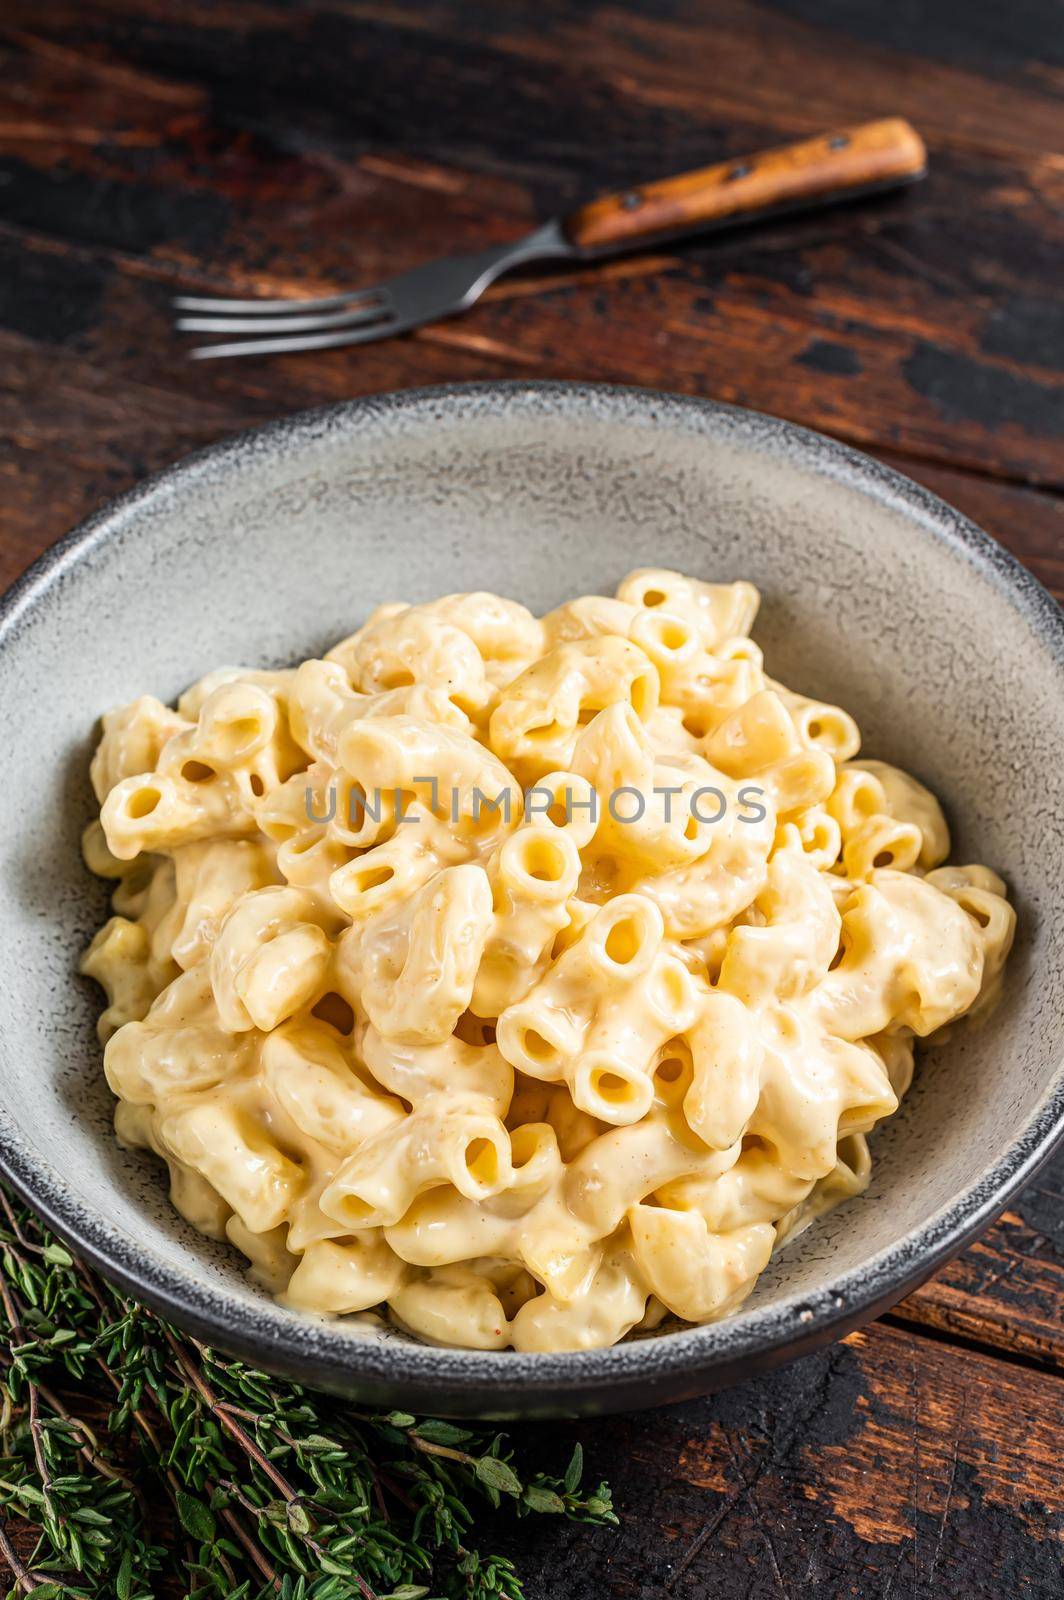 American dish Mac and cheese macaroni pasta with Cheddar. Dark wooden background. Top view by Composter